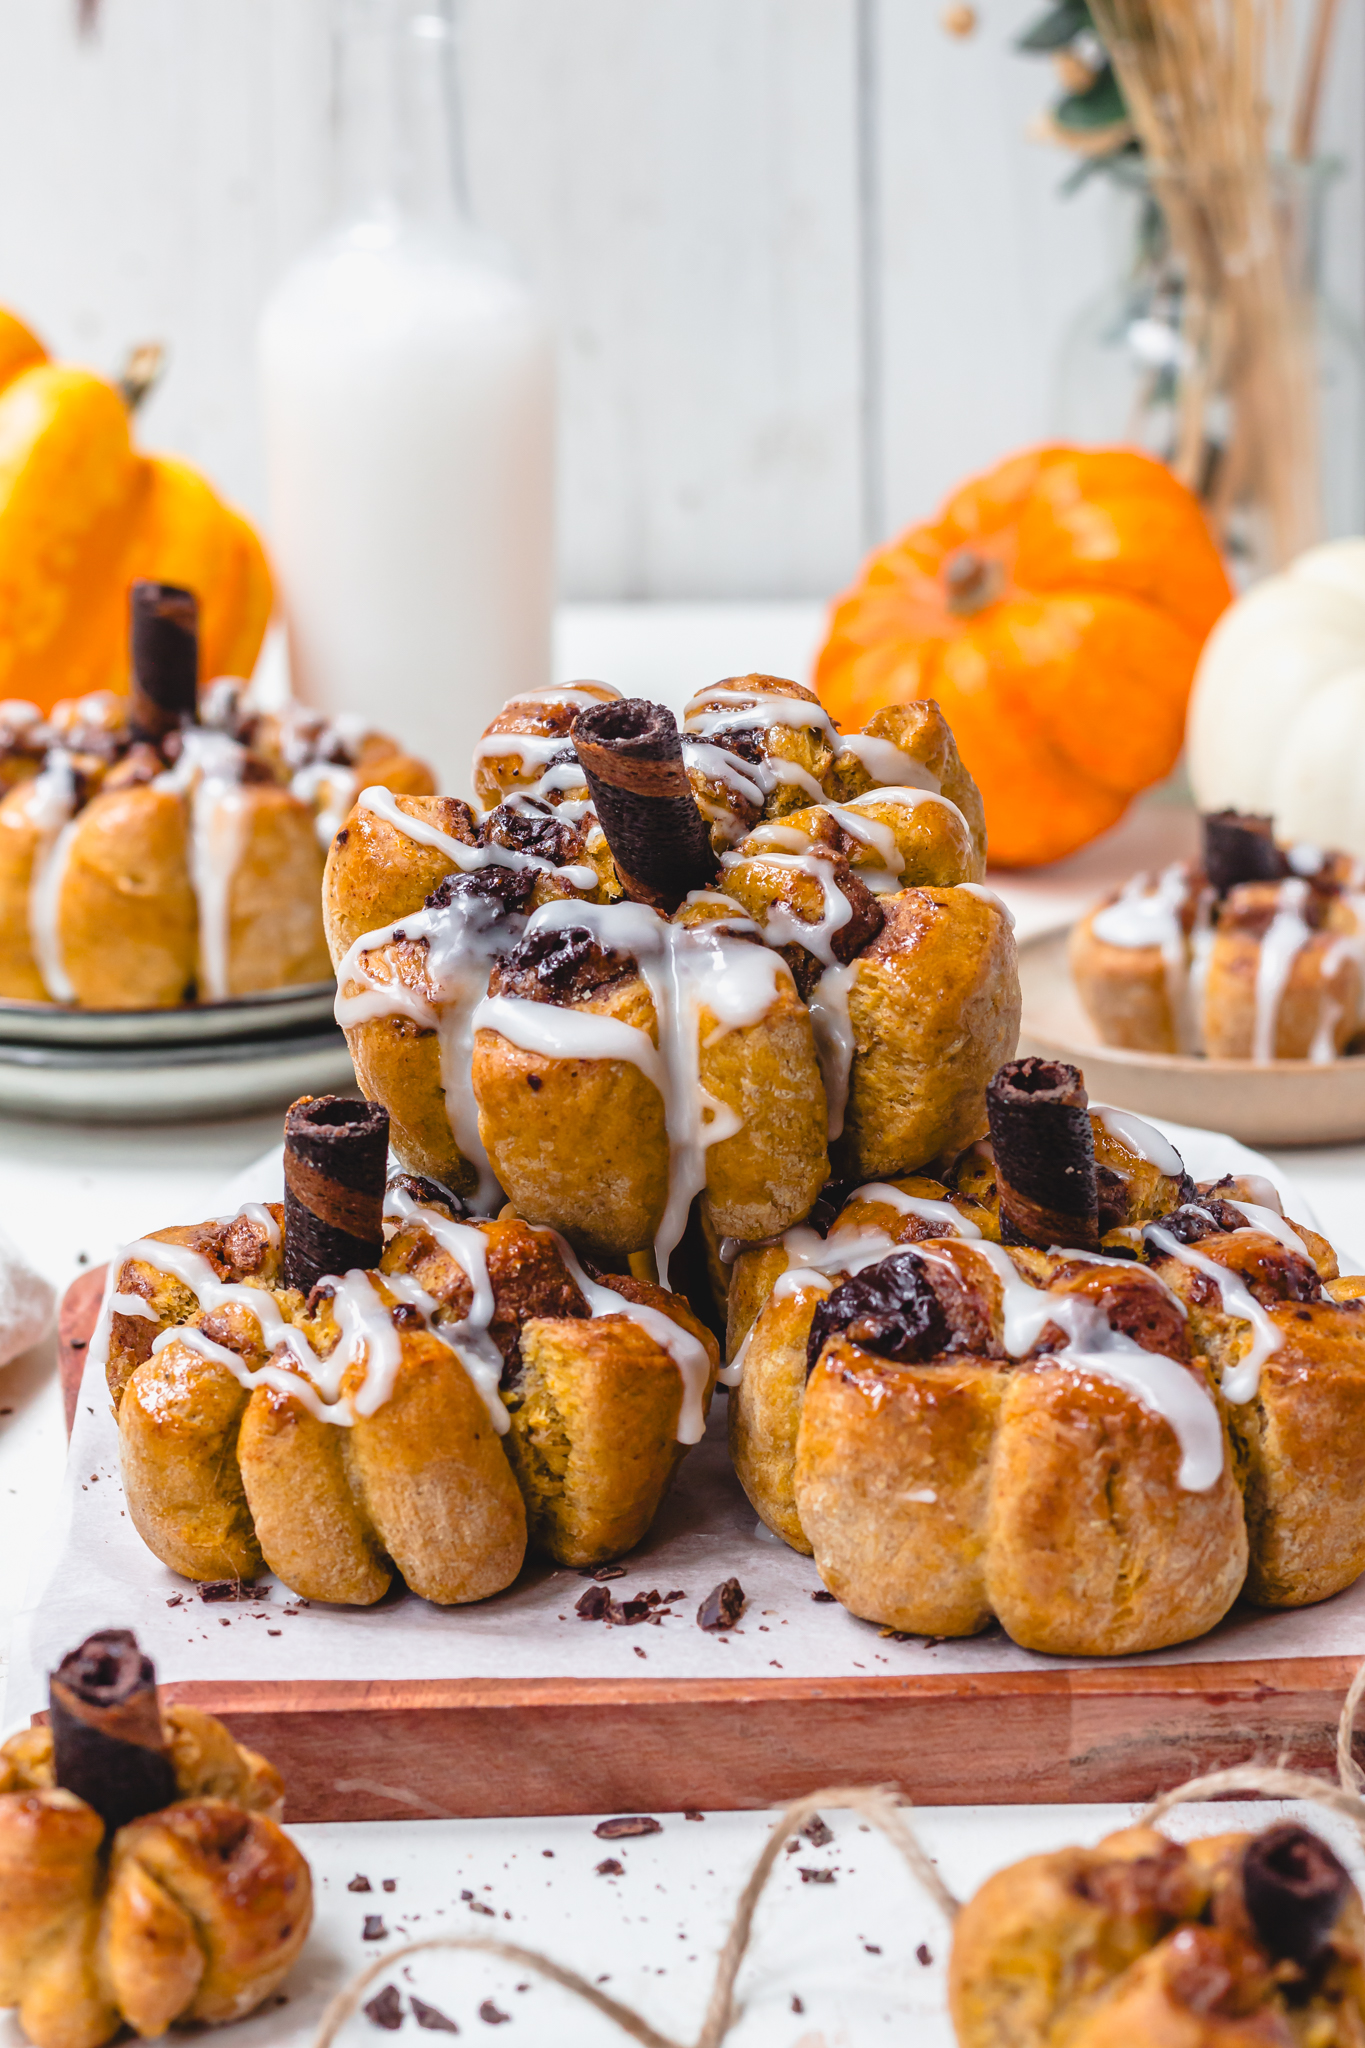 A few Pumpkin-Shaped Chocolate Cinnamon Rolls stacked on one another